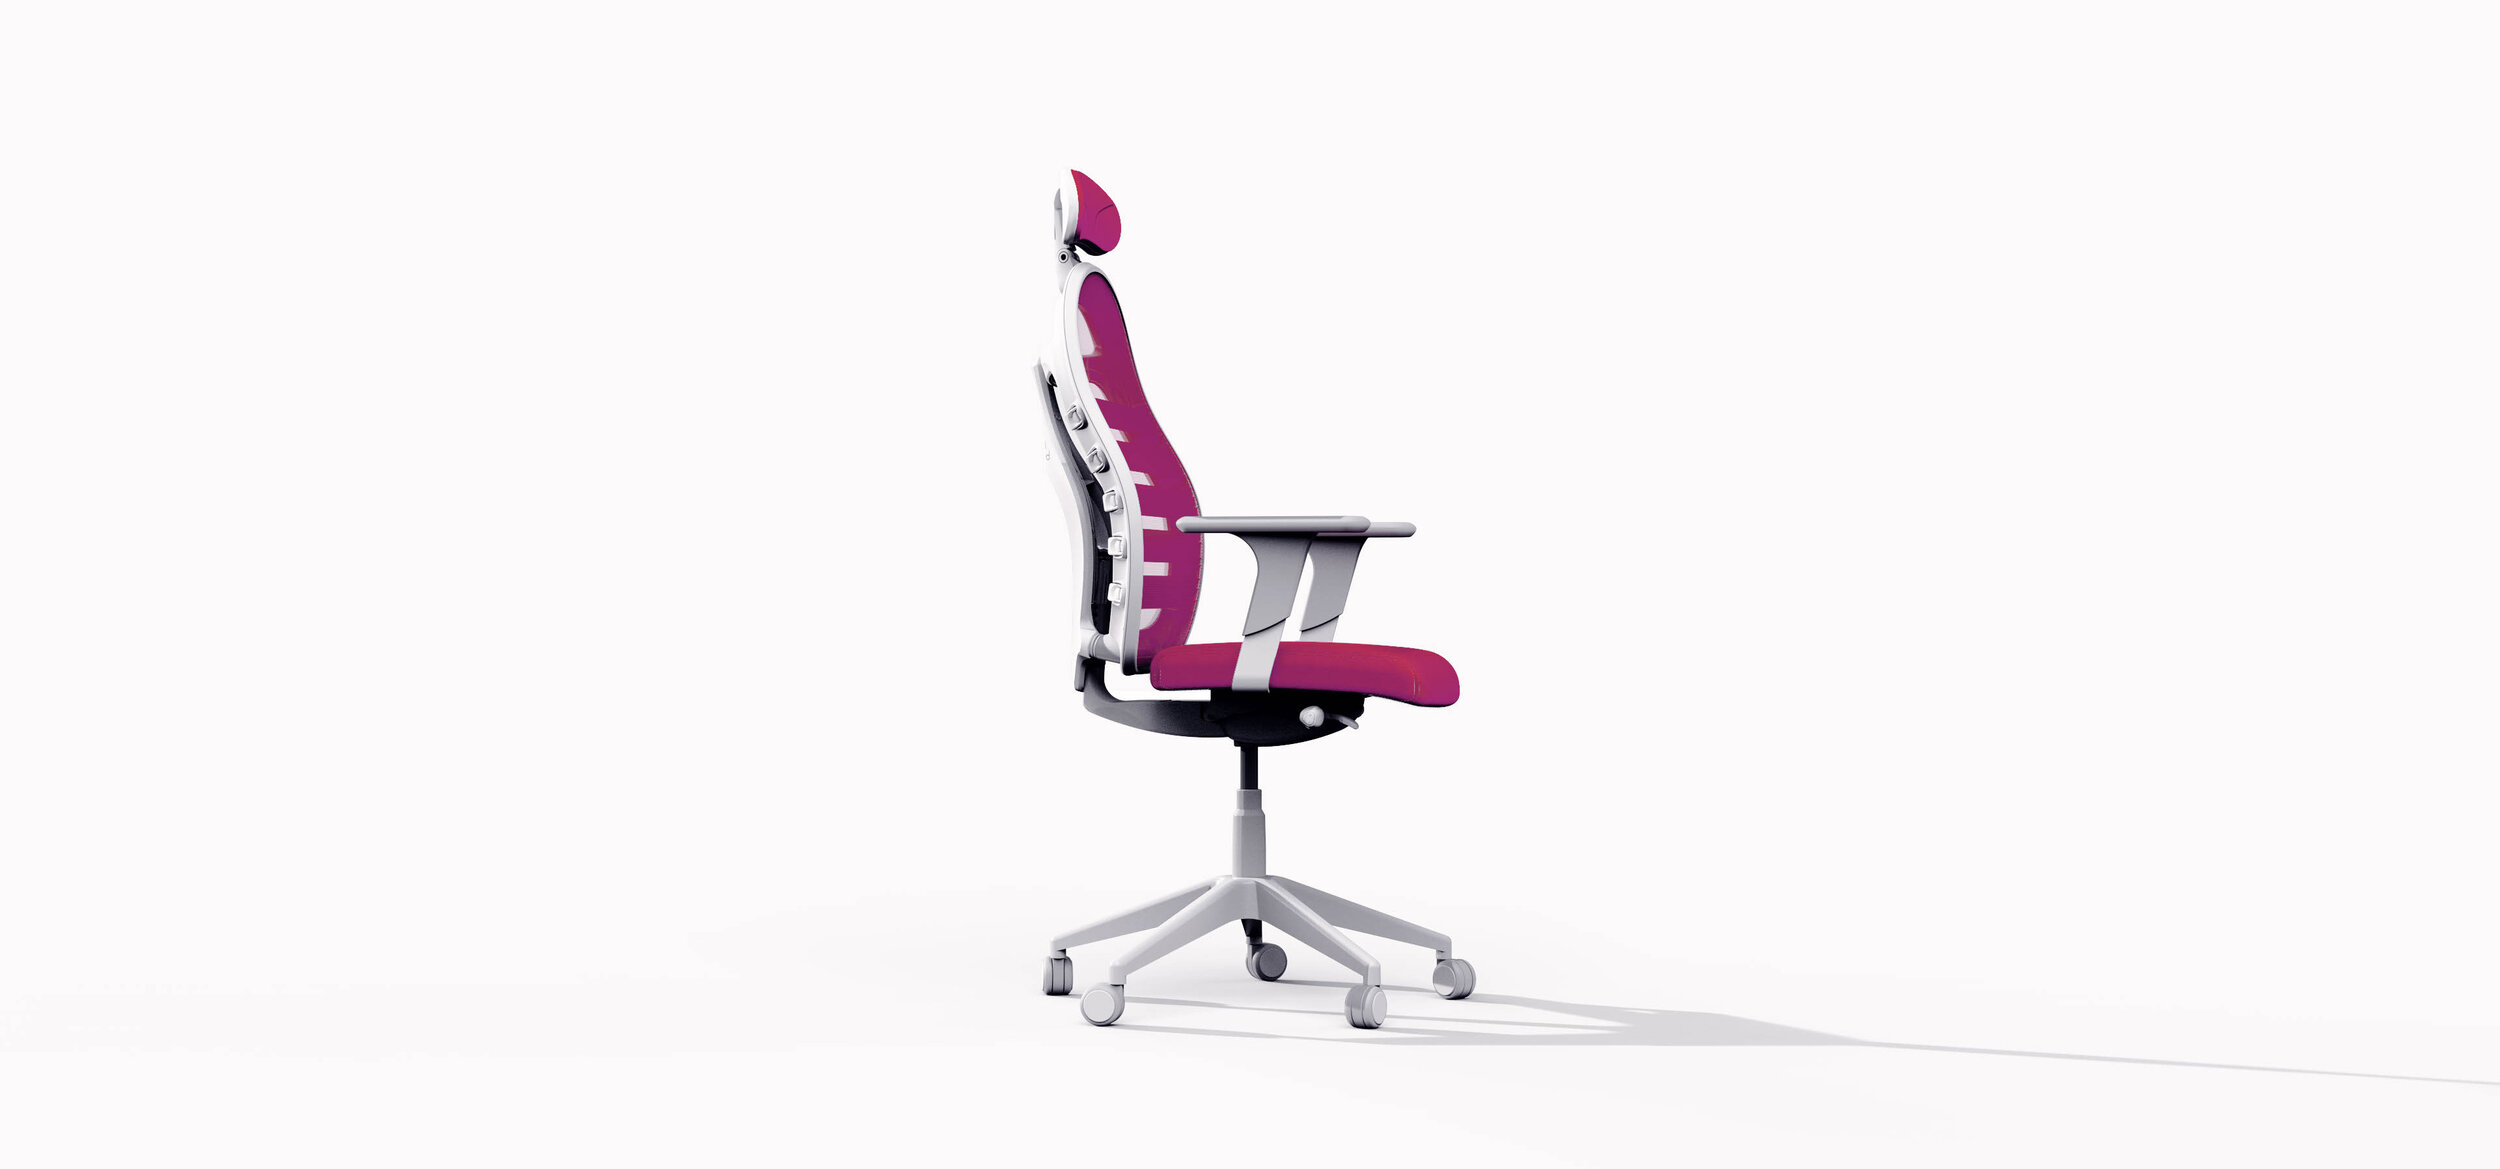 Sit and Move: Cpod Mesh Ergonomic Chair